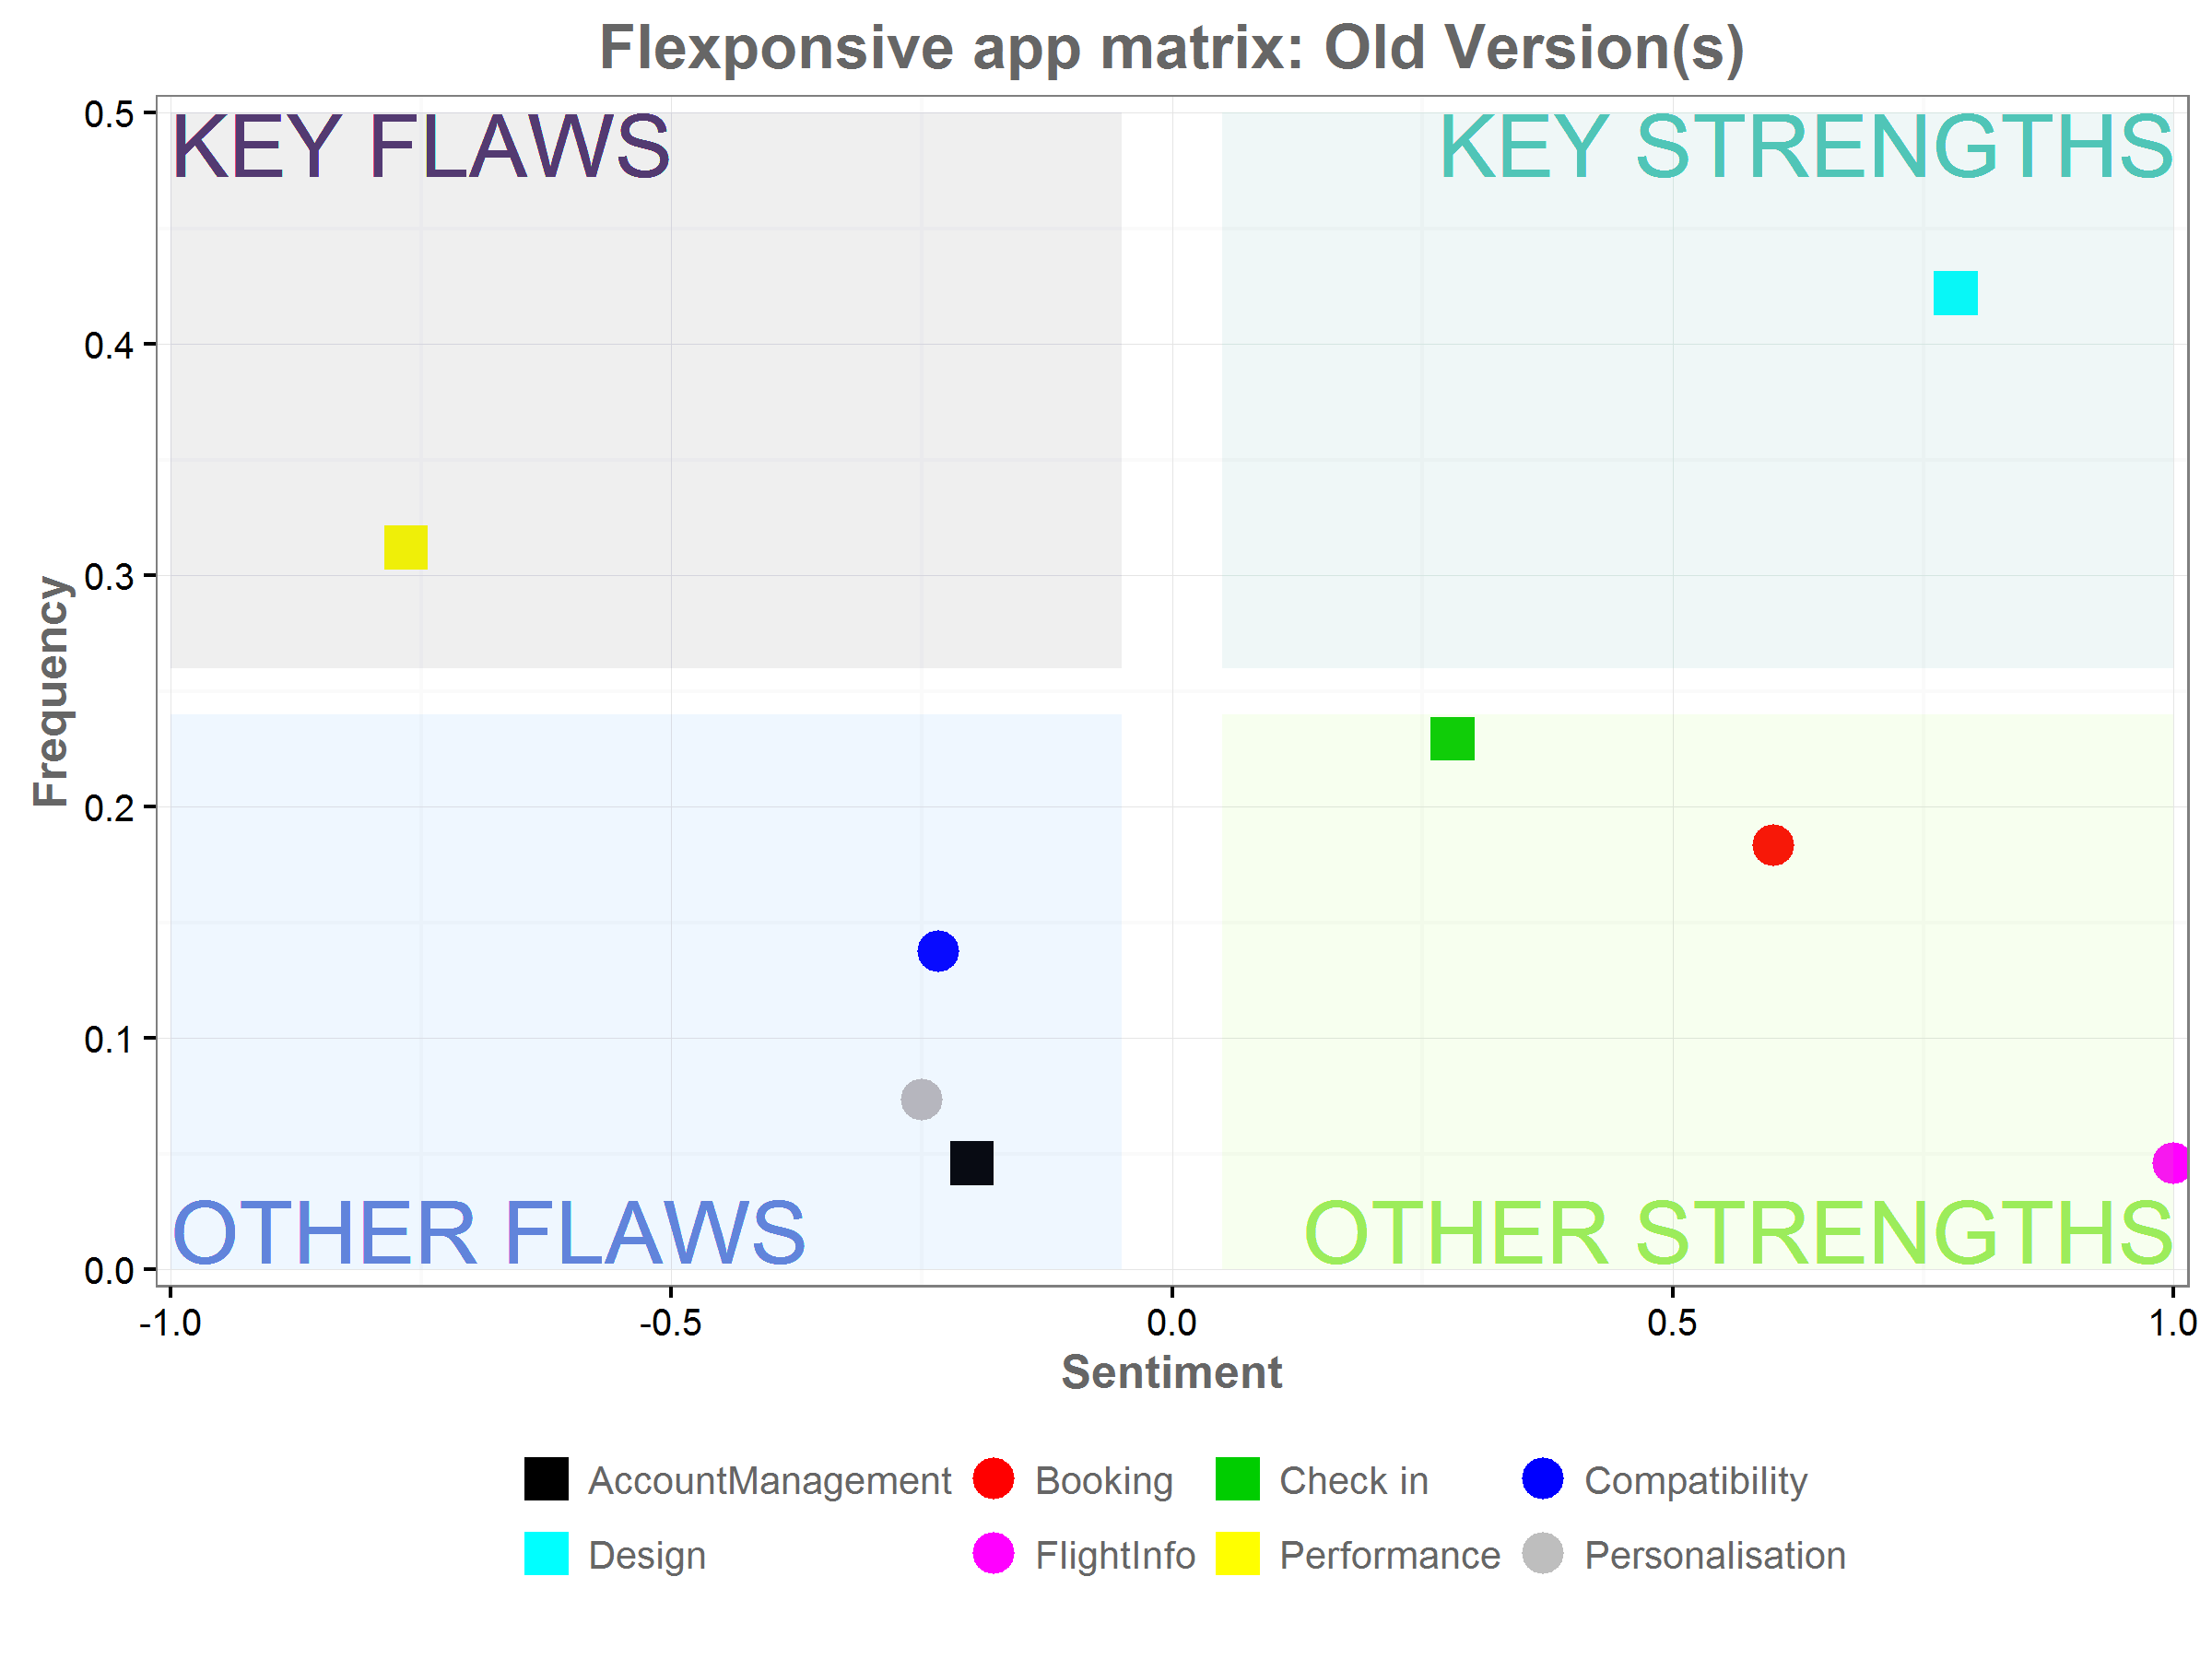 A graph with 4 sections, showing the flaws and strengths of the old app.